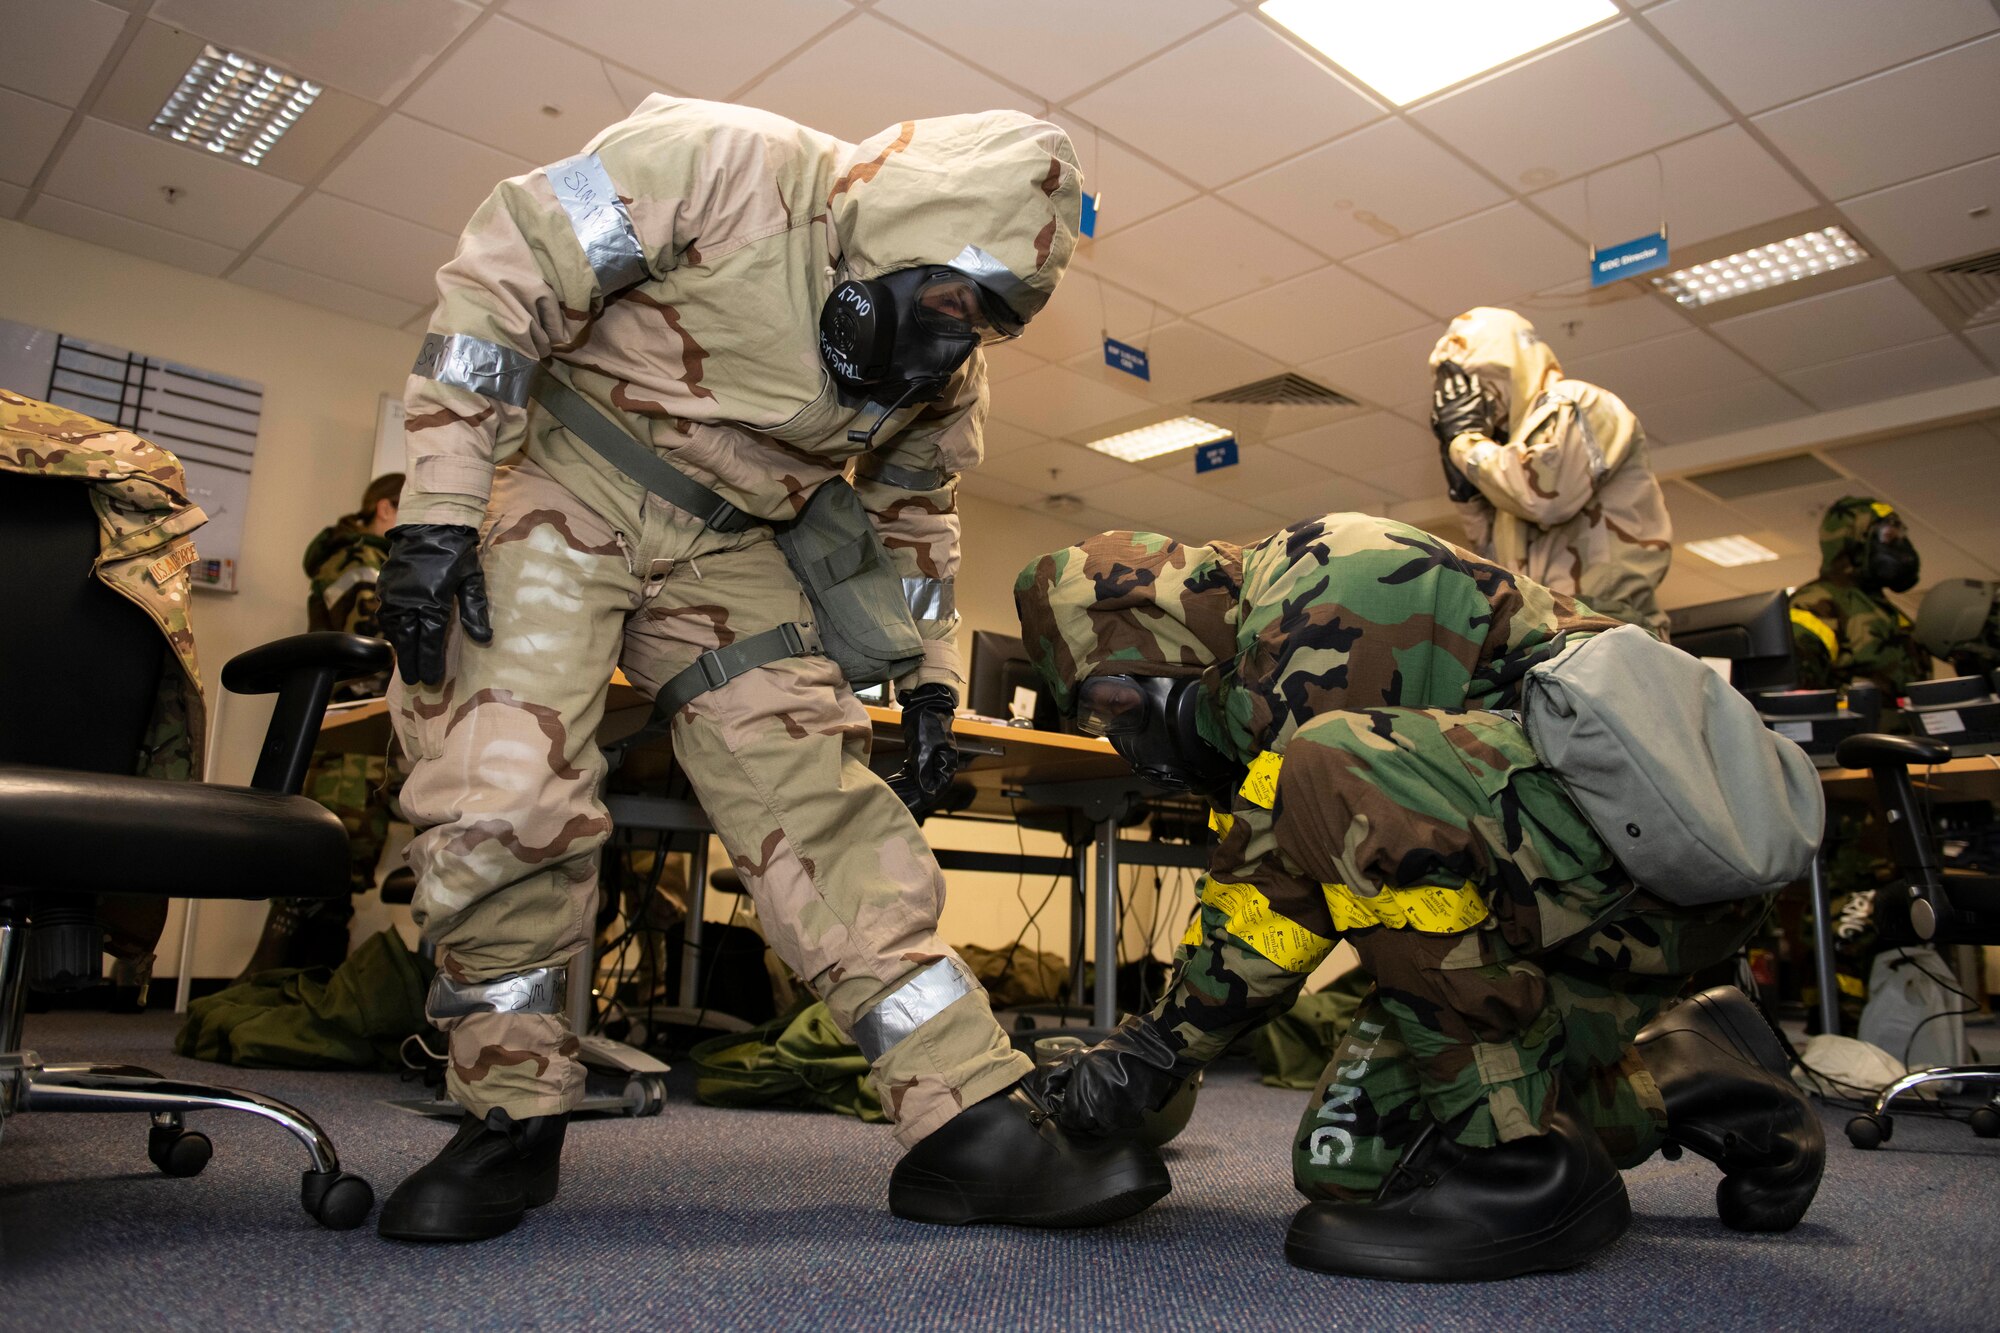 A member of the Emergency Operations Center assists a fellow Airman with their Mission Oriented Protective Posture gear during an exercise at RAF Alconbury, England, Nov. 17, 2022. The EOC is the command and control hub for emergency operations on base. Airmen across the 501st Combat Support Wing took part in a readiness exercise to test various capabilities, identify areas for improvement and strengthen operations. (U.S. Air Force photo by Senior Airman Jennifer Zima)